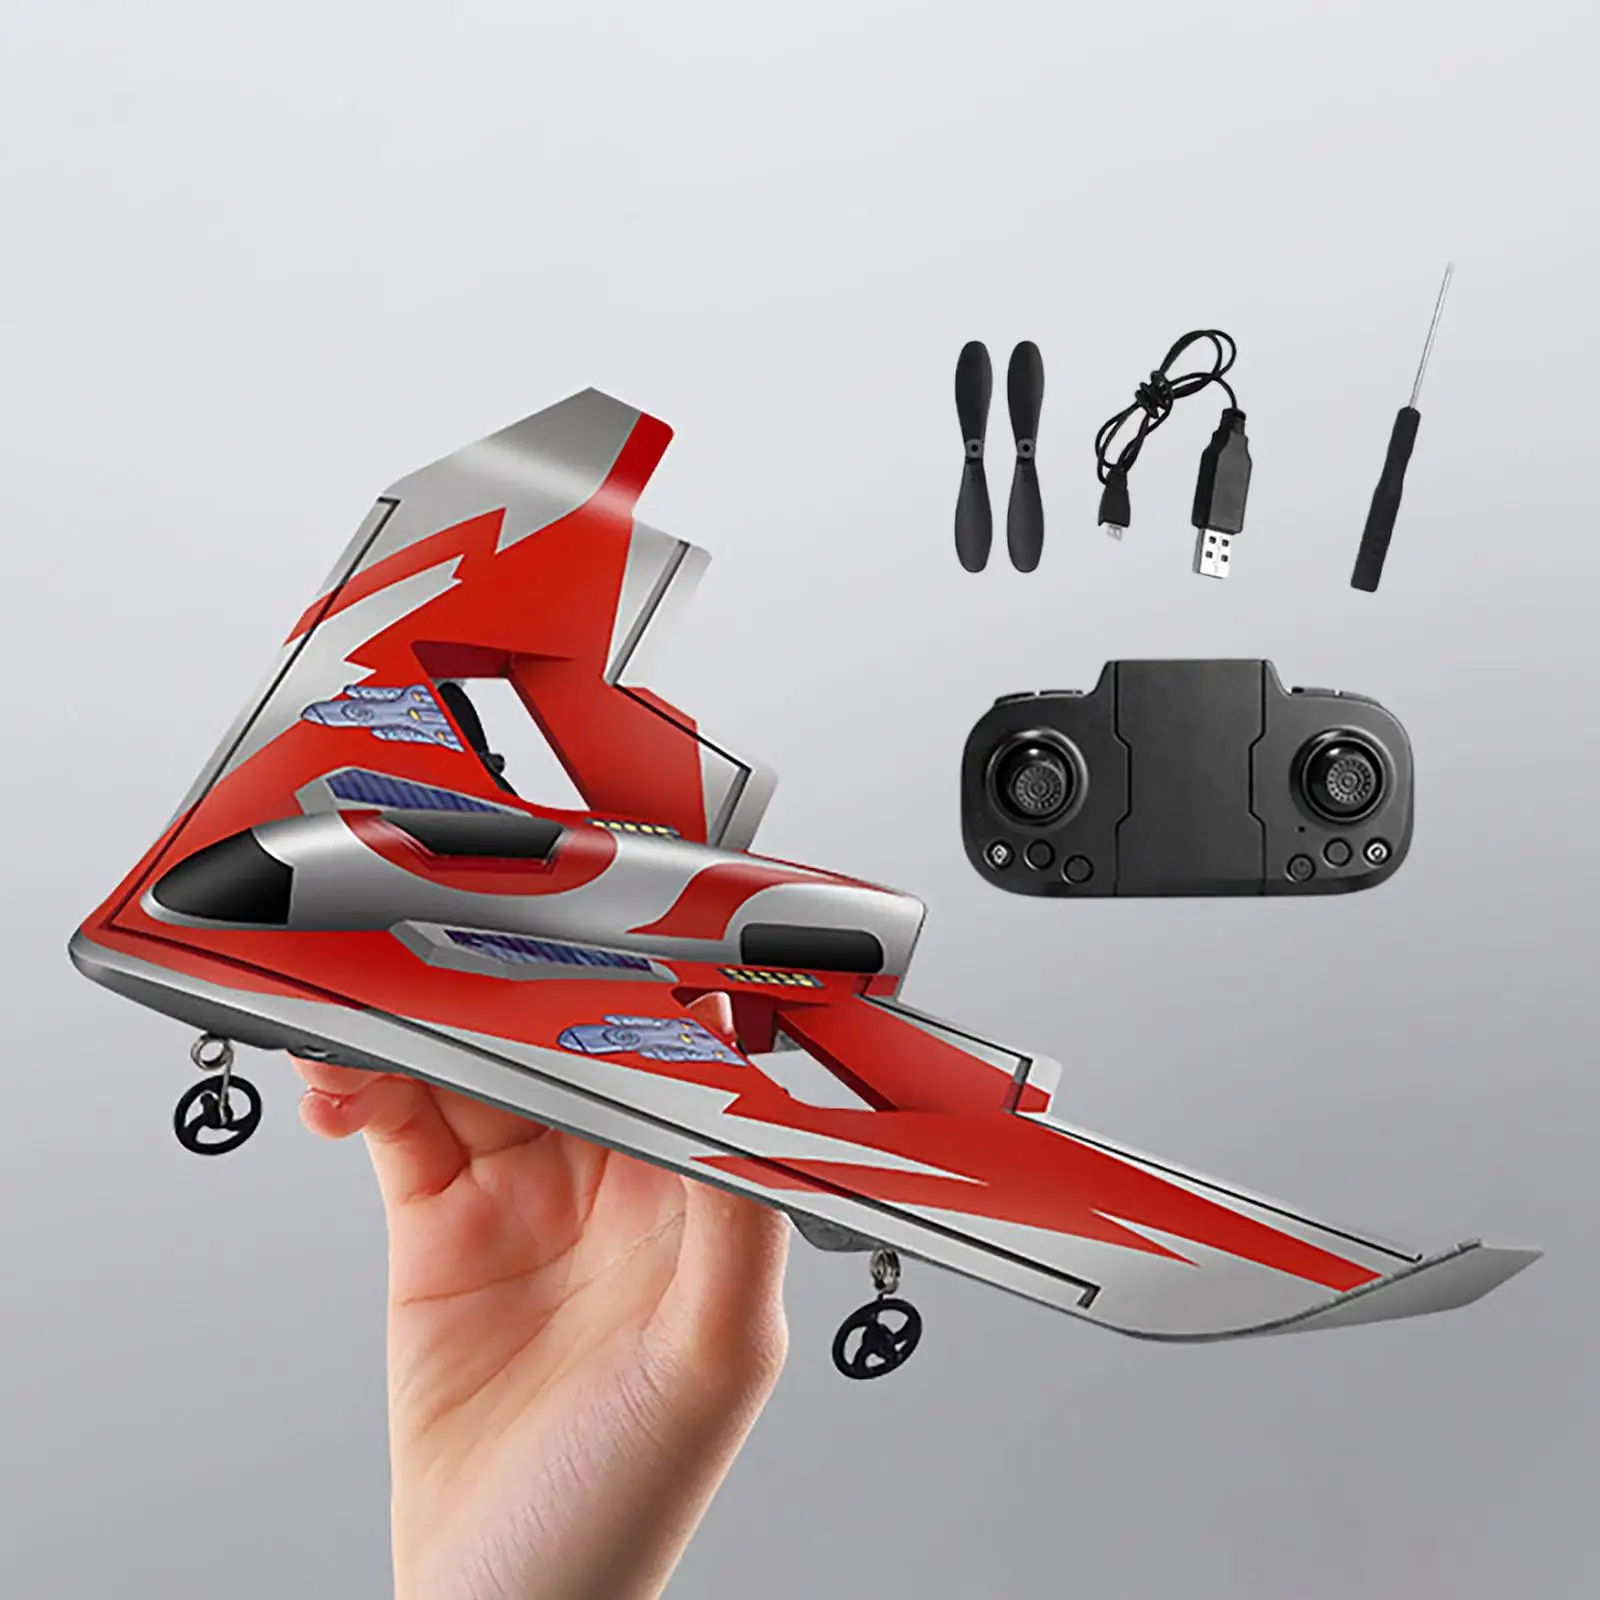 2.4G 2CH Remote Control Aircraft Electric RC Glider Model for Kids Indoor